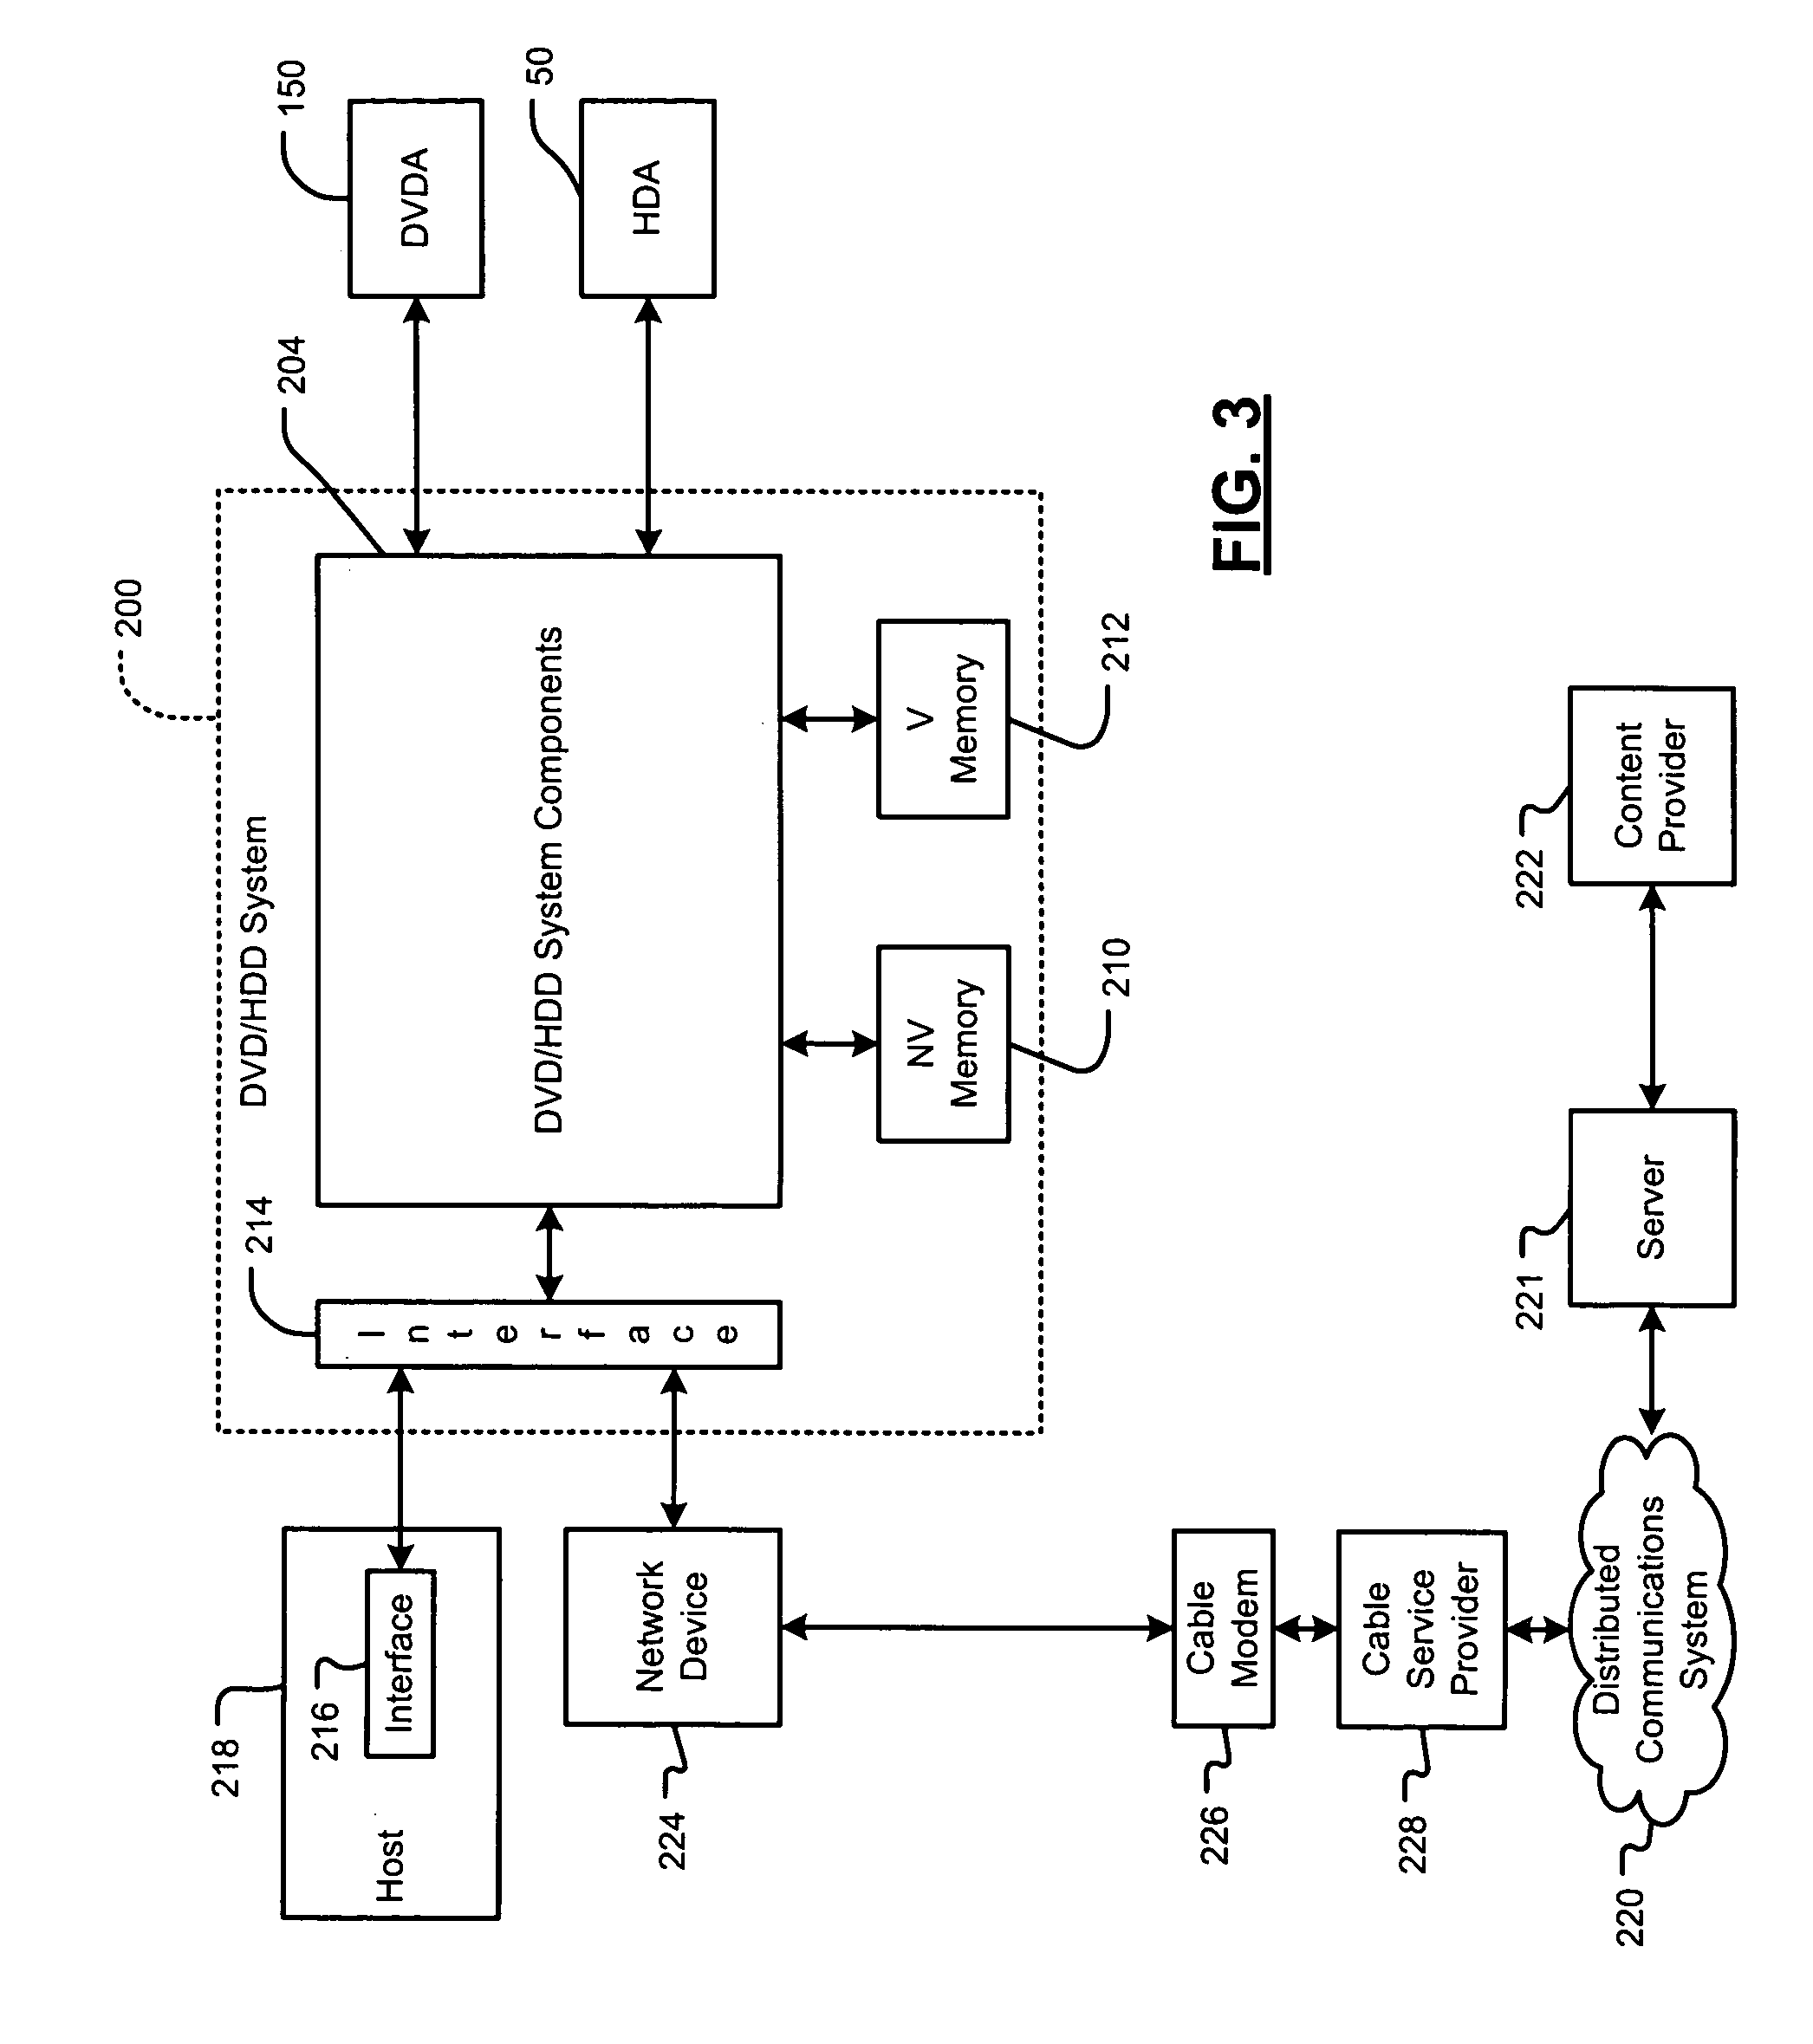 Unified control and memory for a combined DVD/HDD system